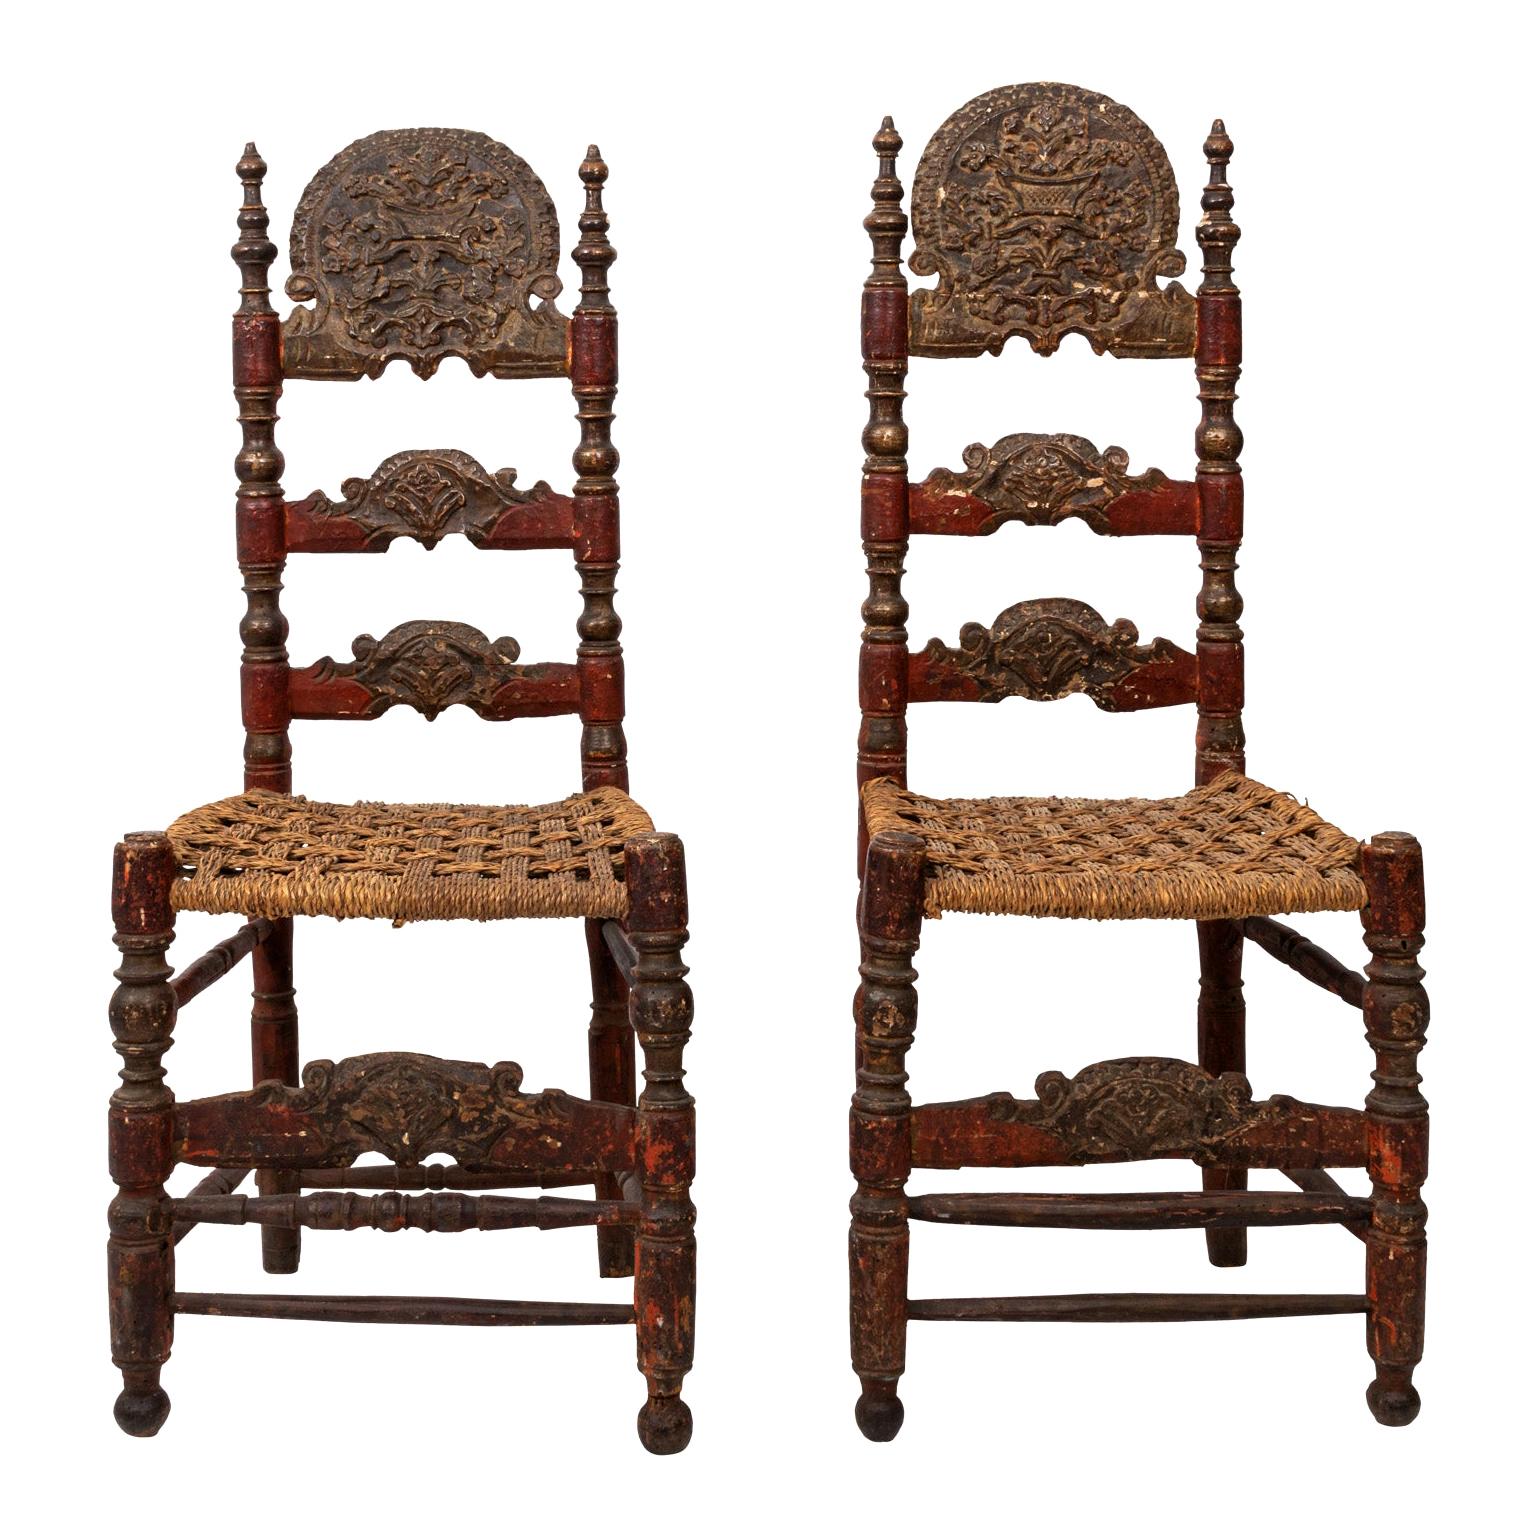 Pair of Early 18th Century Italian Chairs